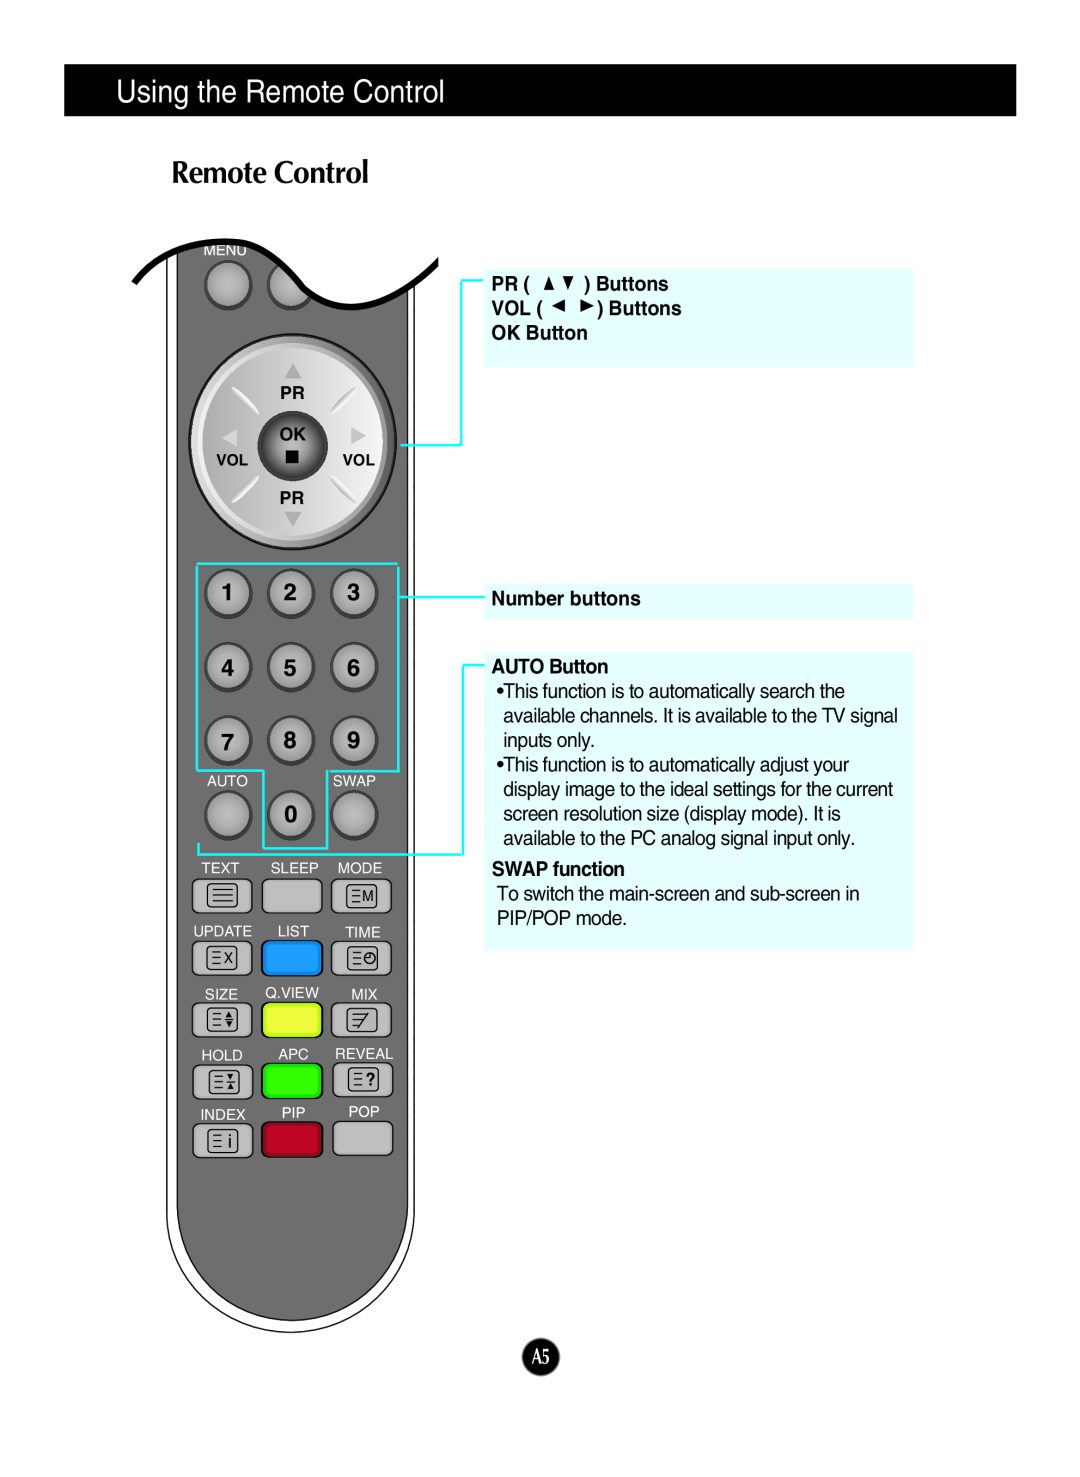 LG Electronics L2323T Using the Remote Control, PR Buttons VOL Buttons OK Button Number buttons AUTO Button, SWAP function 